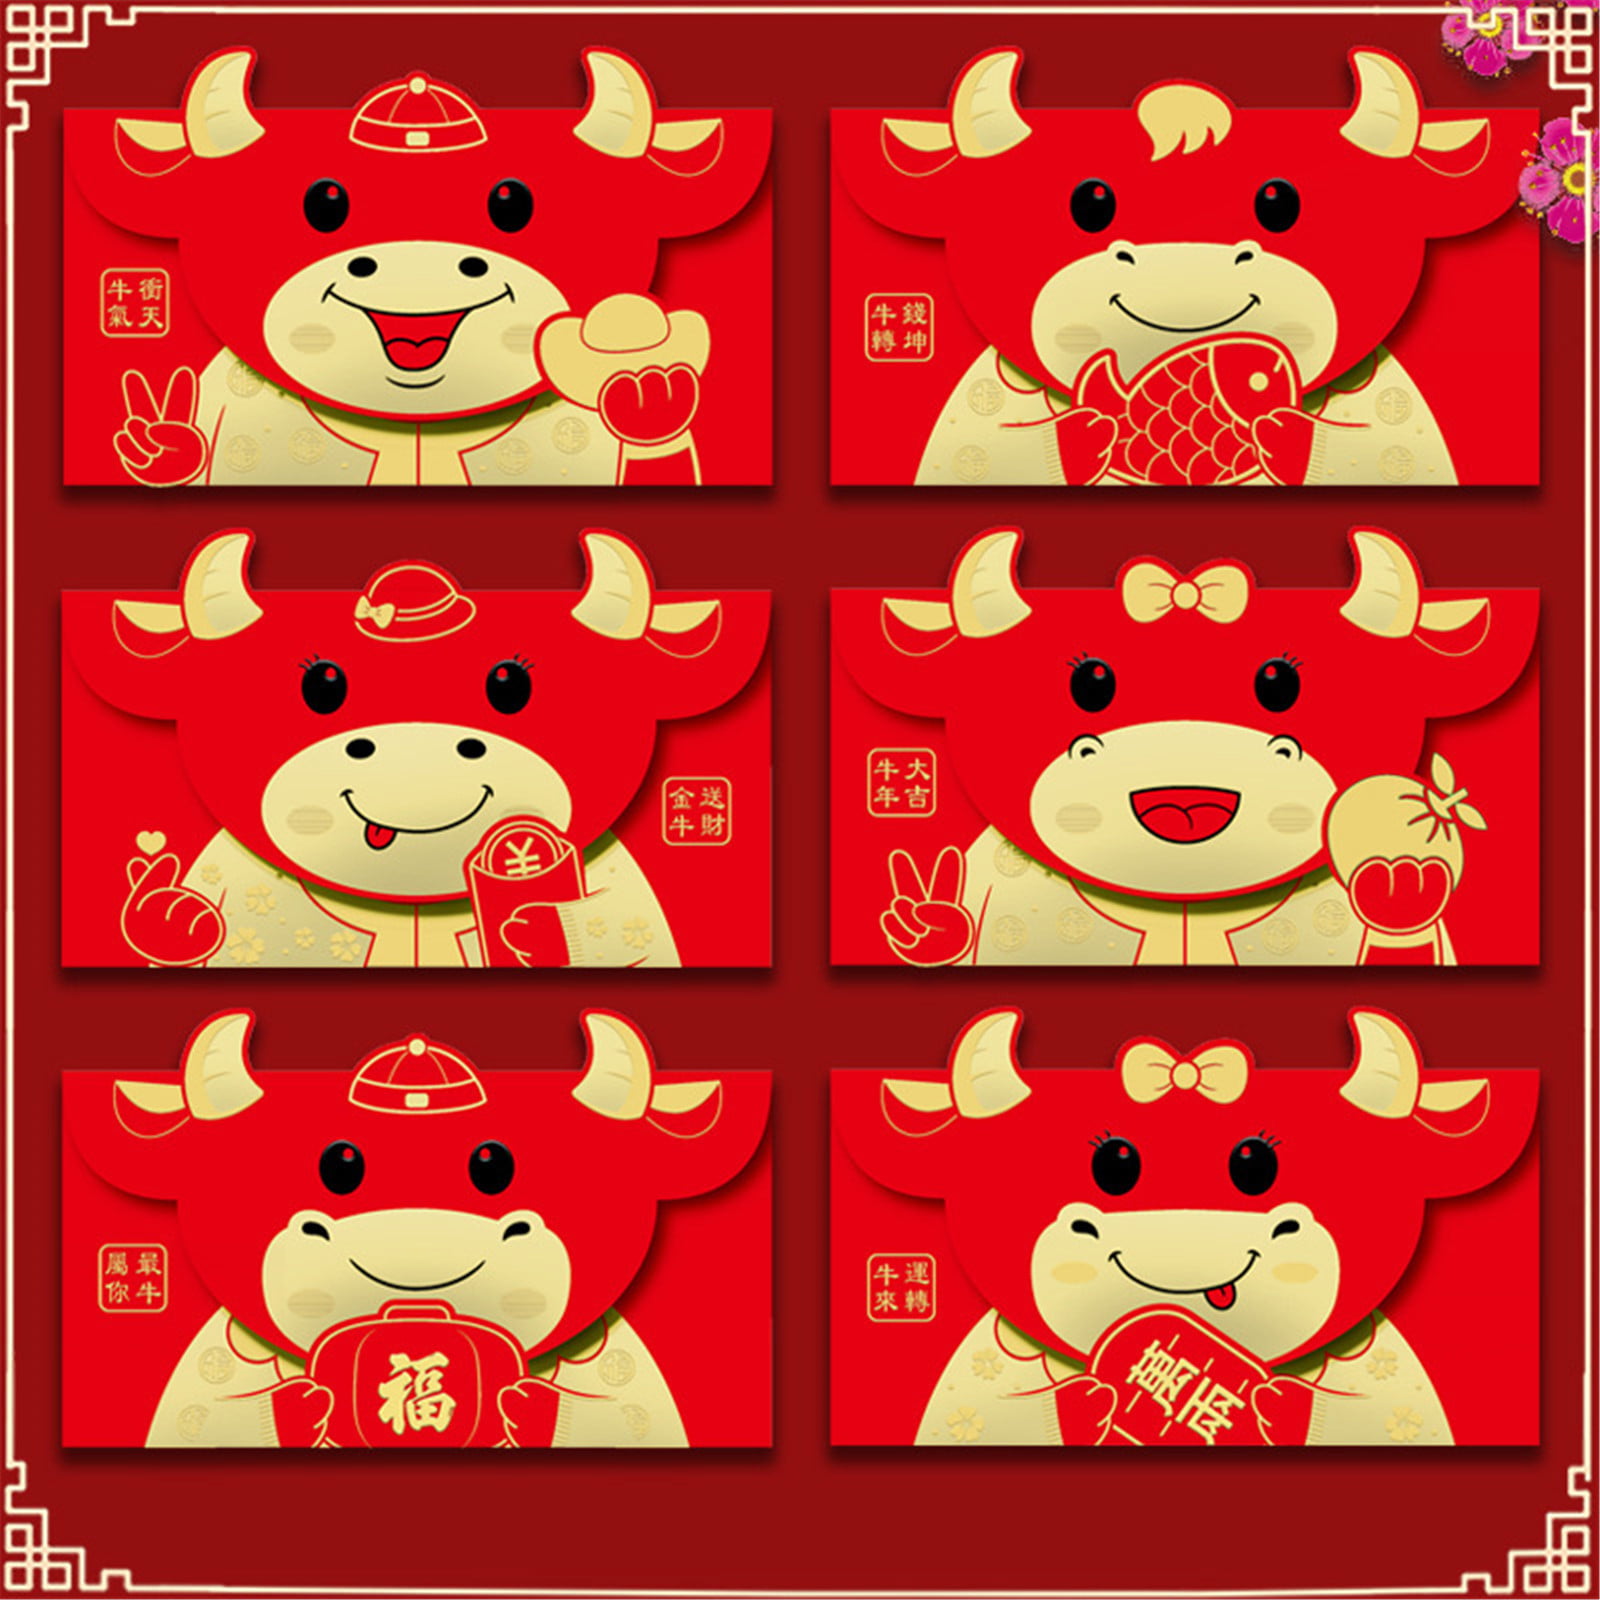 LN_ 6Pcs 2021 New Year Red Envelopes Gift Cow Money Bag Chinese Lucky Money Ba 